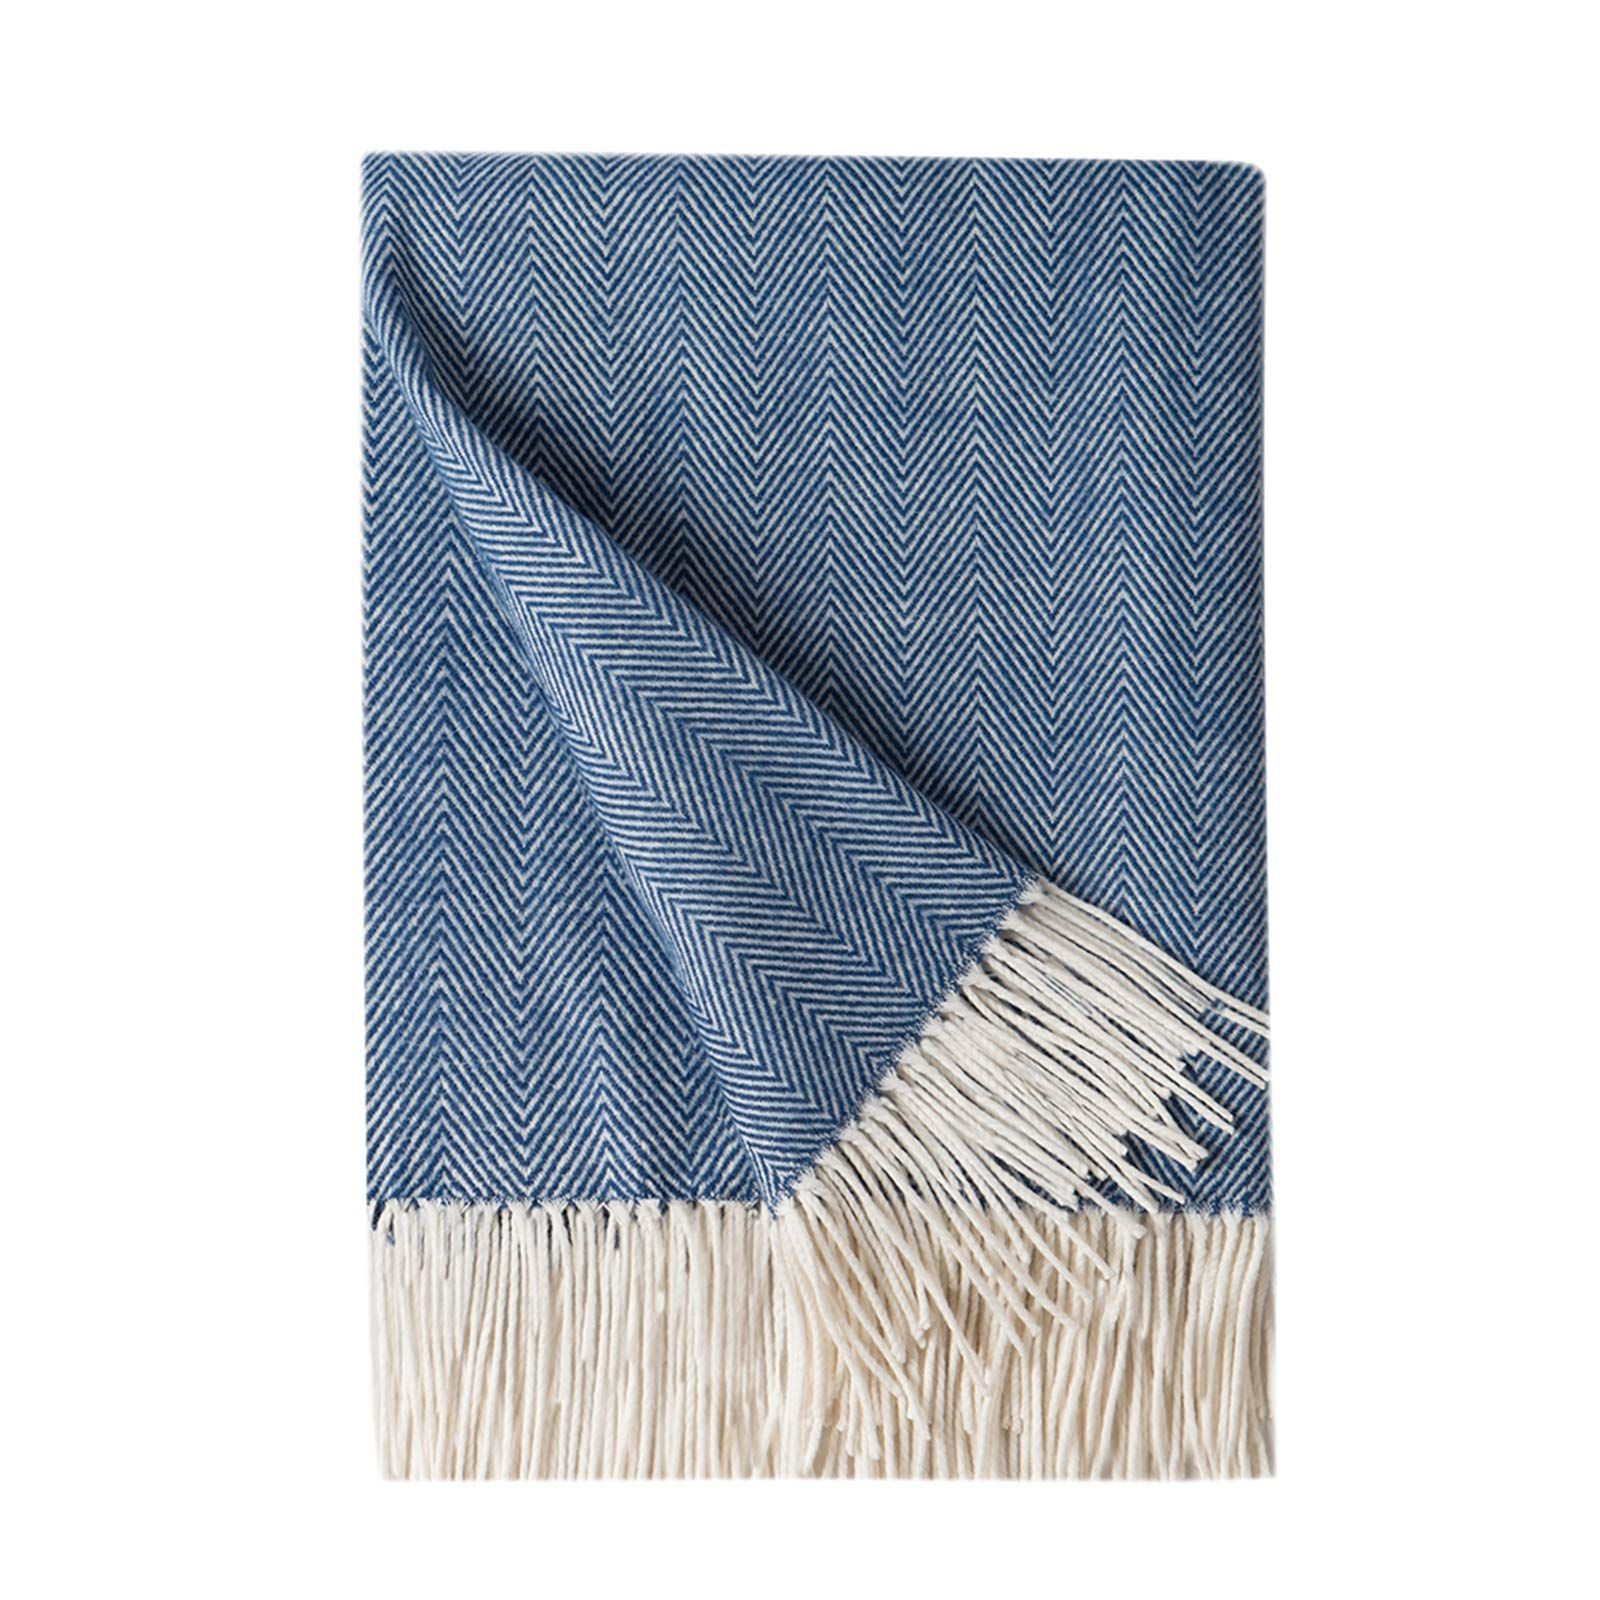 BOURINA Decorative Herringbone Faux Cashmere Fringe Throw Blanket Lightweight Soft Cozy for Bed or S | Amazon (US)